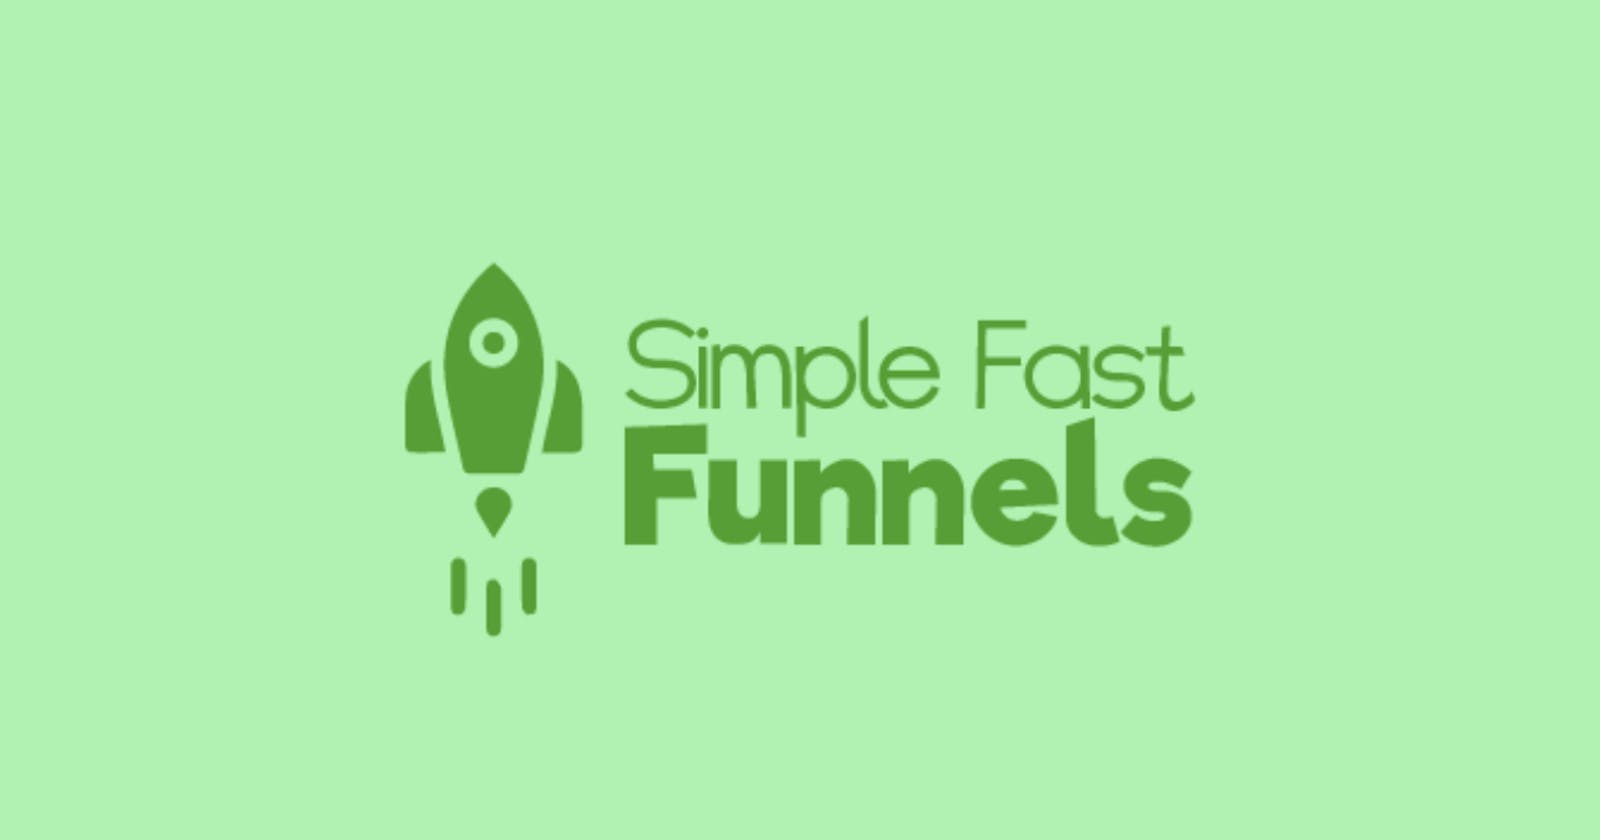 Simple Fast Funnels Features